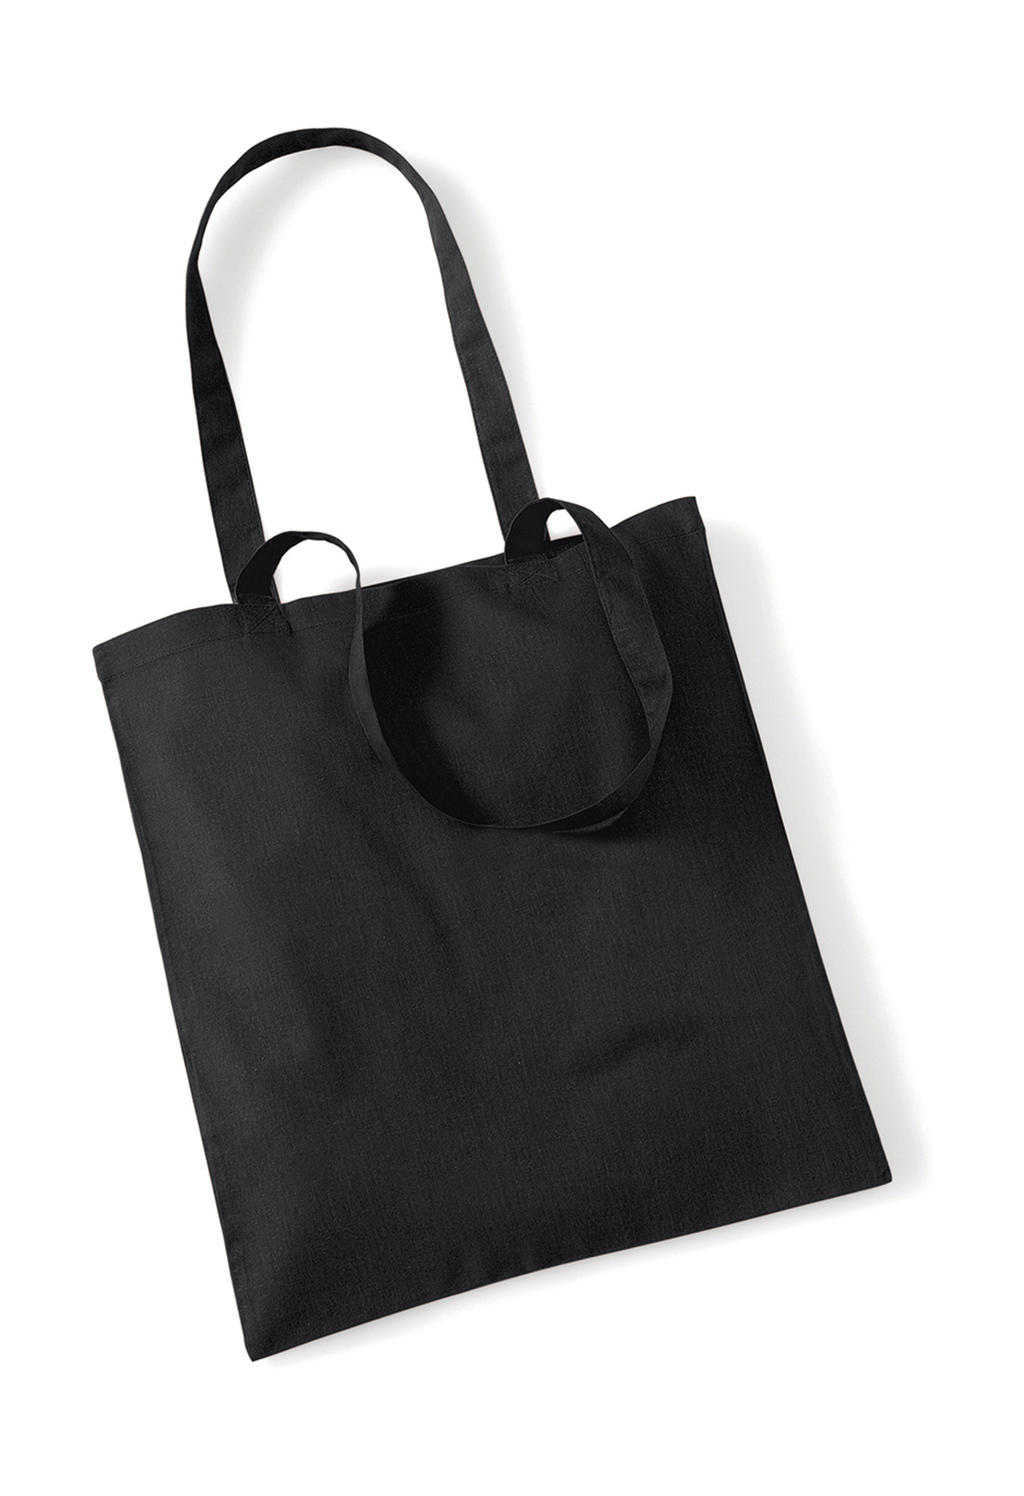  Bag for Life - Long Handles in Farbe Black